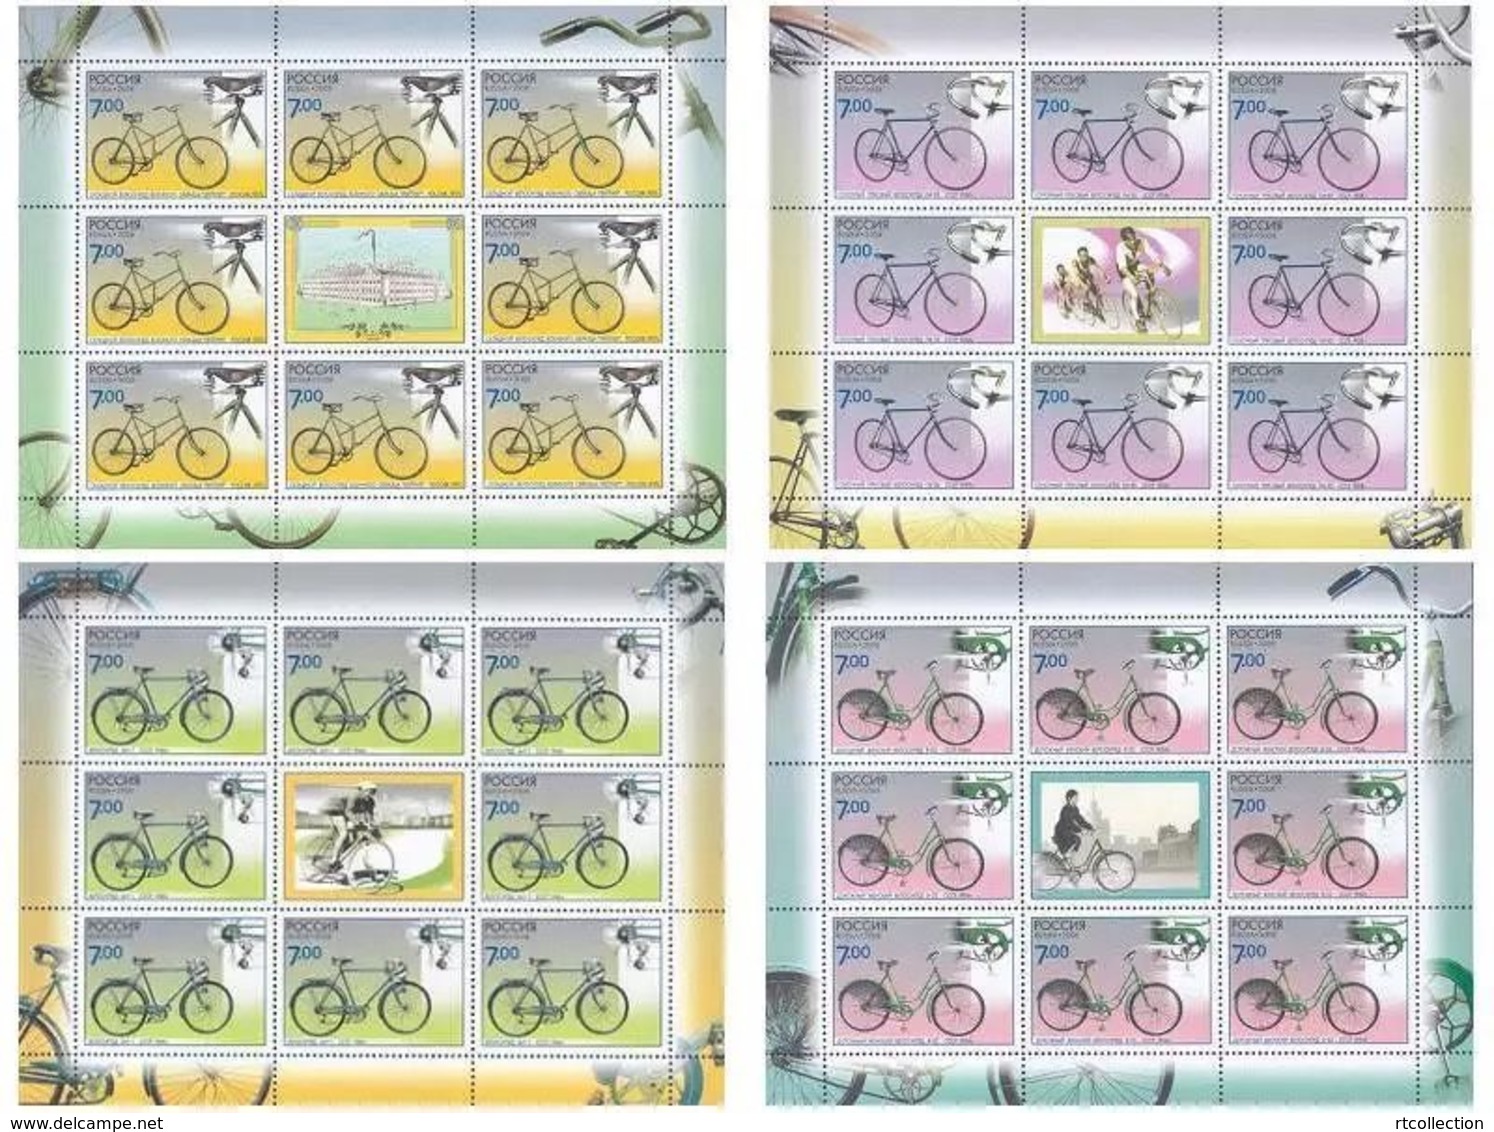 Russia 2008 Sheet History Of Sciences Technique Bicycles Transport Bike Cycling Race Bicycle Stamps MNH Michel 1518-1521 - Ganze Bögen